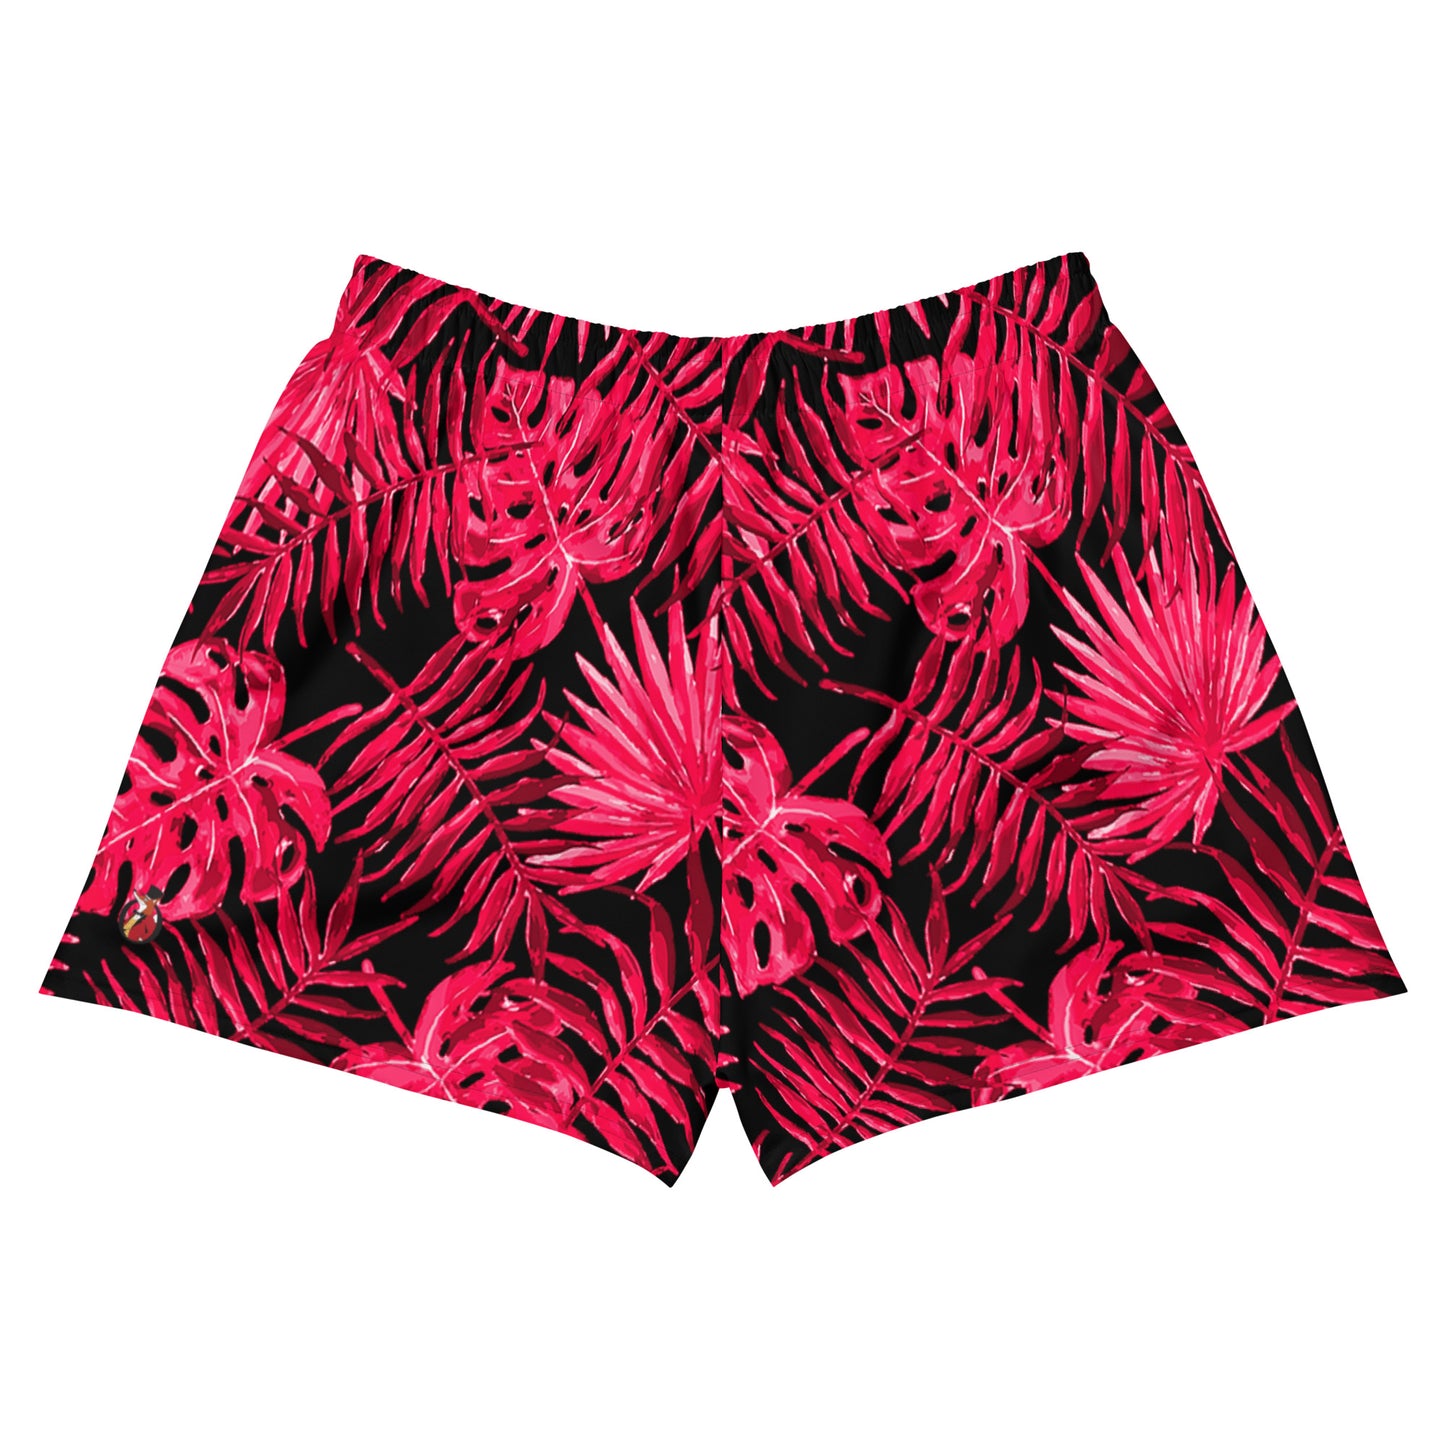 Snooty Fox Art Women’s Athletic Shorts - Ruby Red Palm Pattern